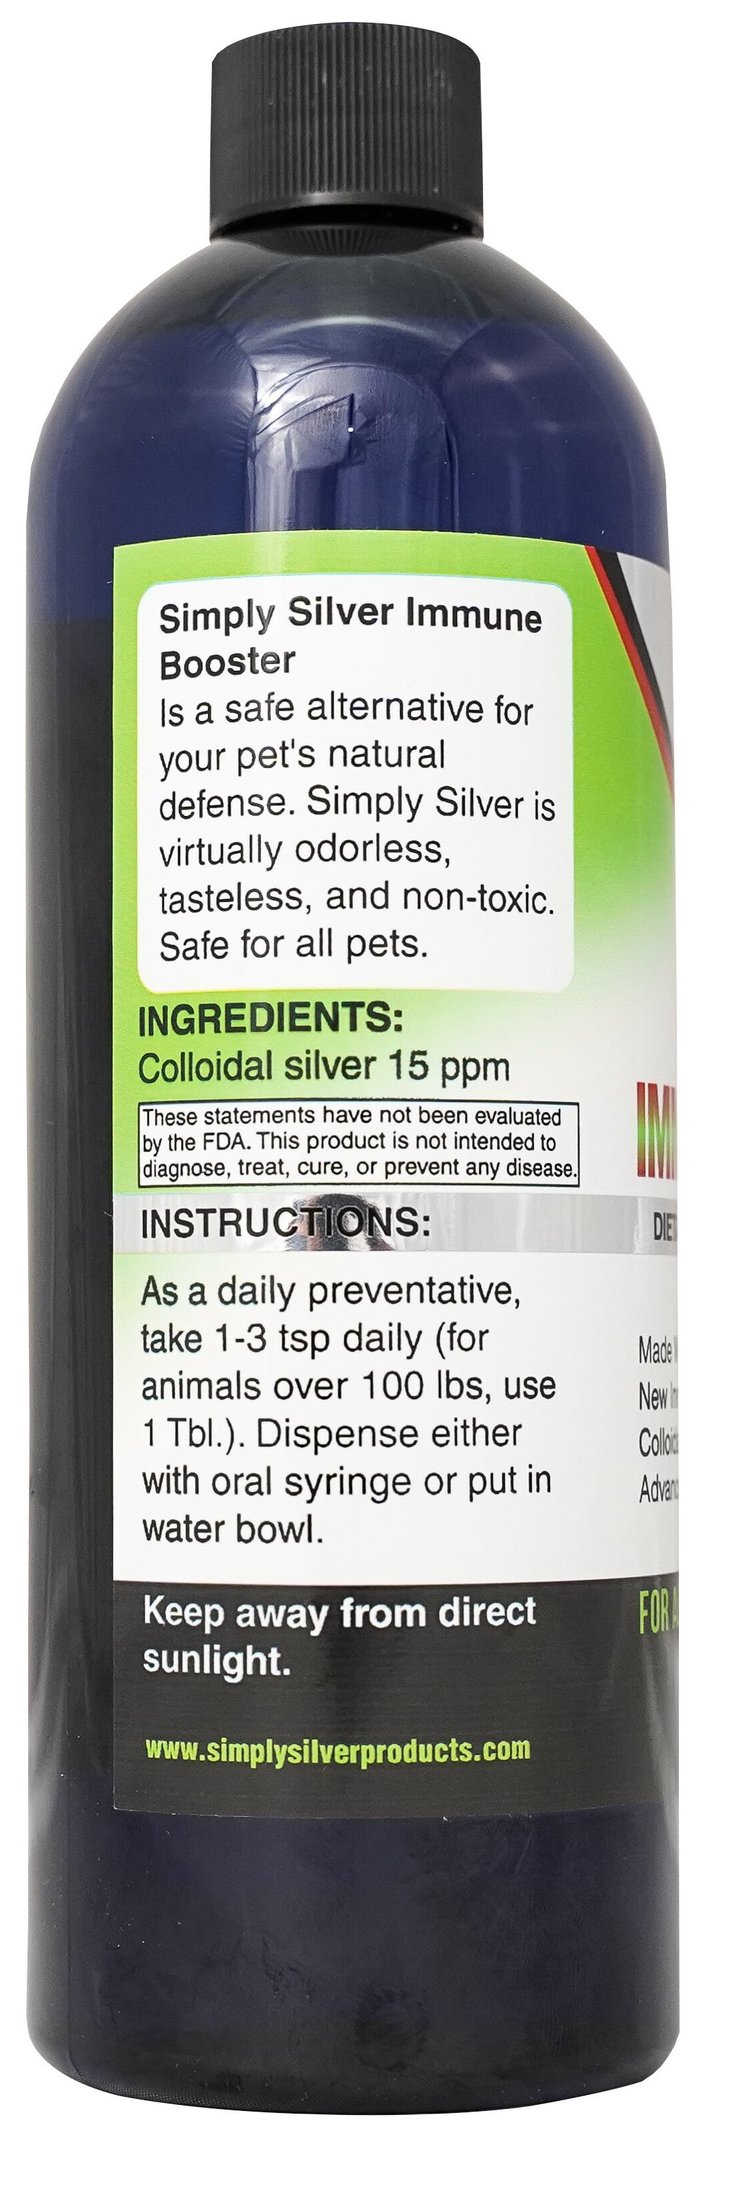 Simply Silver Immune Booster (Safe for all Pets)